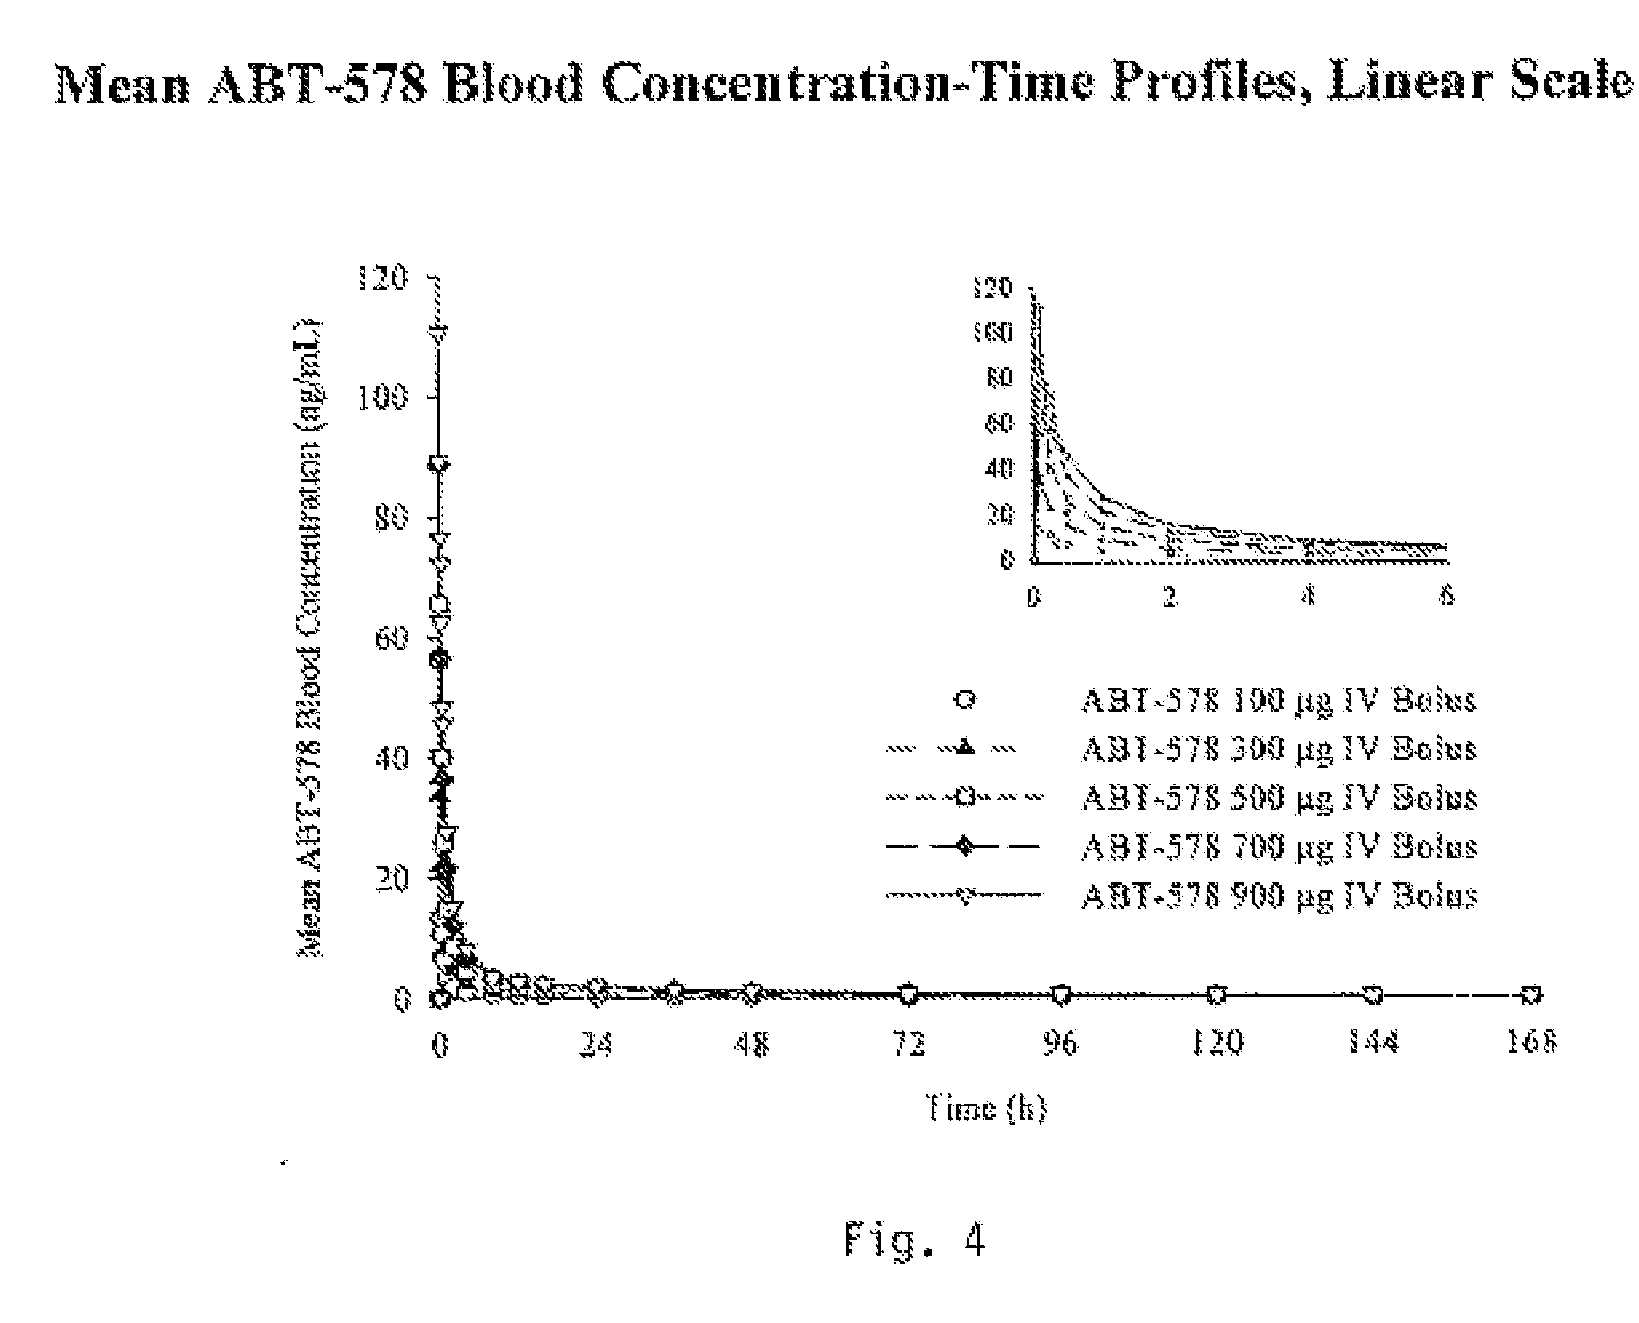 Compositions, systems, kits, and methods of administering rapamycin analogs with paclitaxel using medical devices